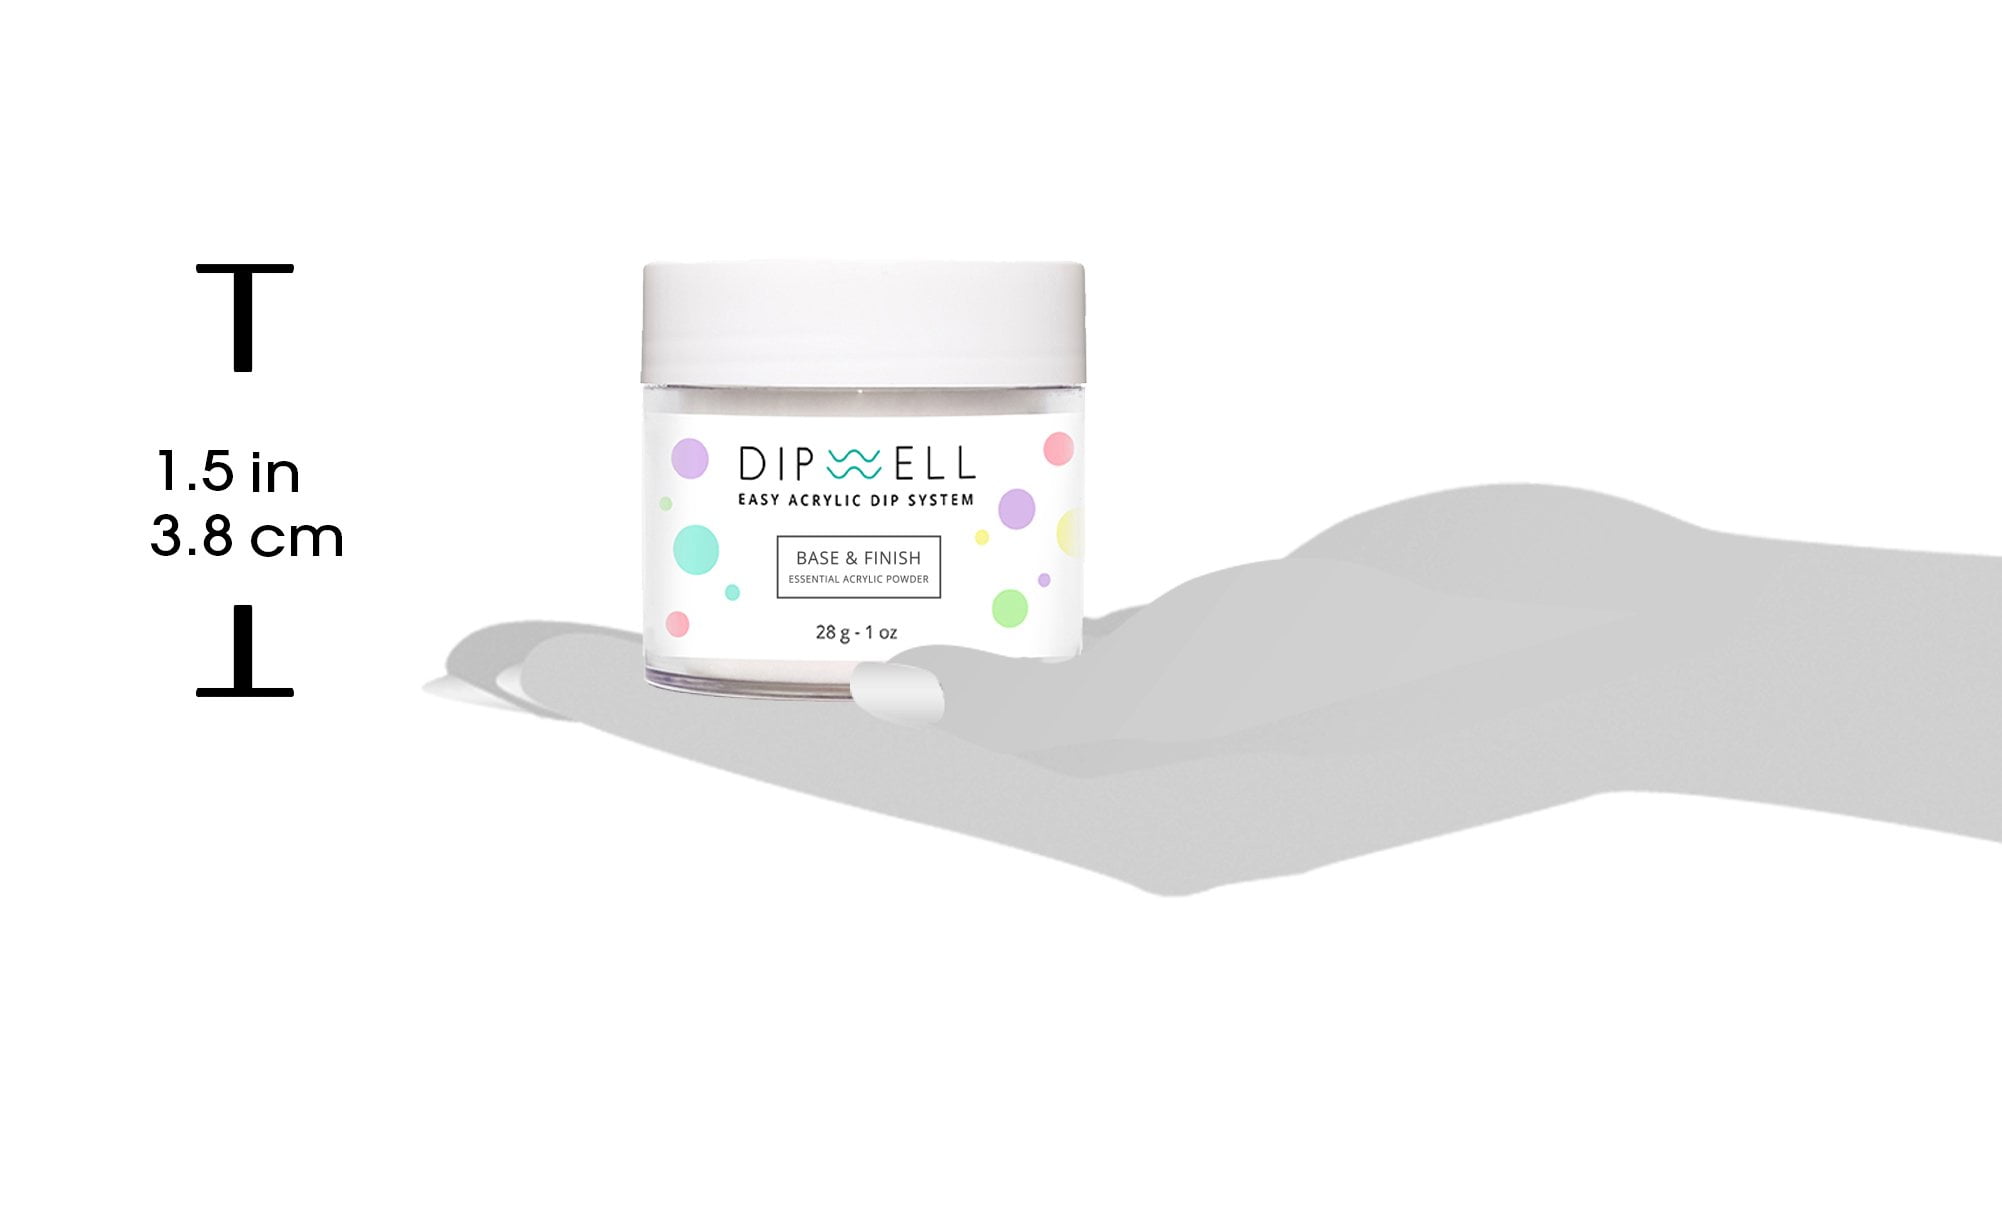 Nail Dip Powder, Glitter Color Collection, Dipping Acrylic for Any Kit or System by DipWell, Size: 1 oz, GL - 21